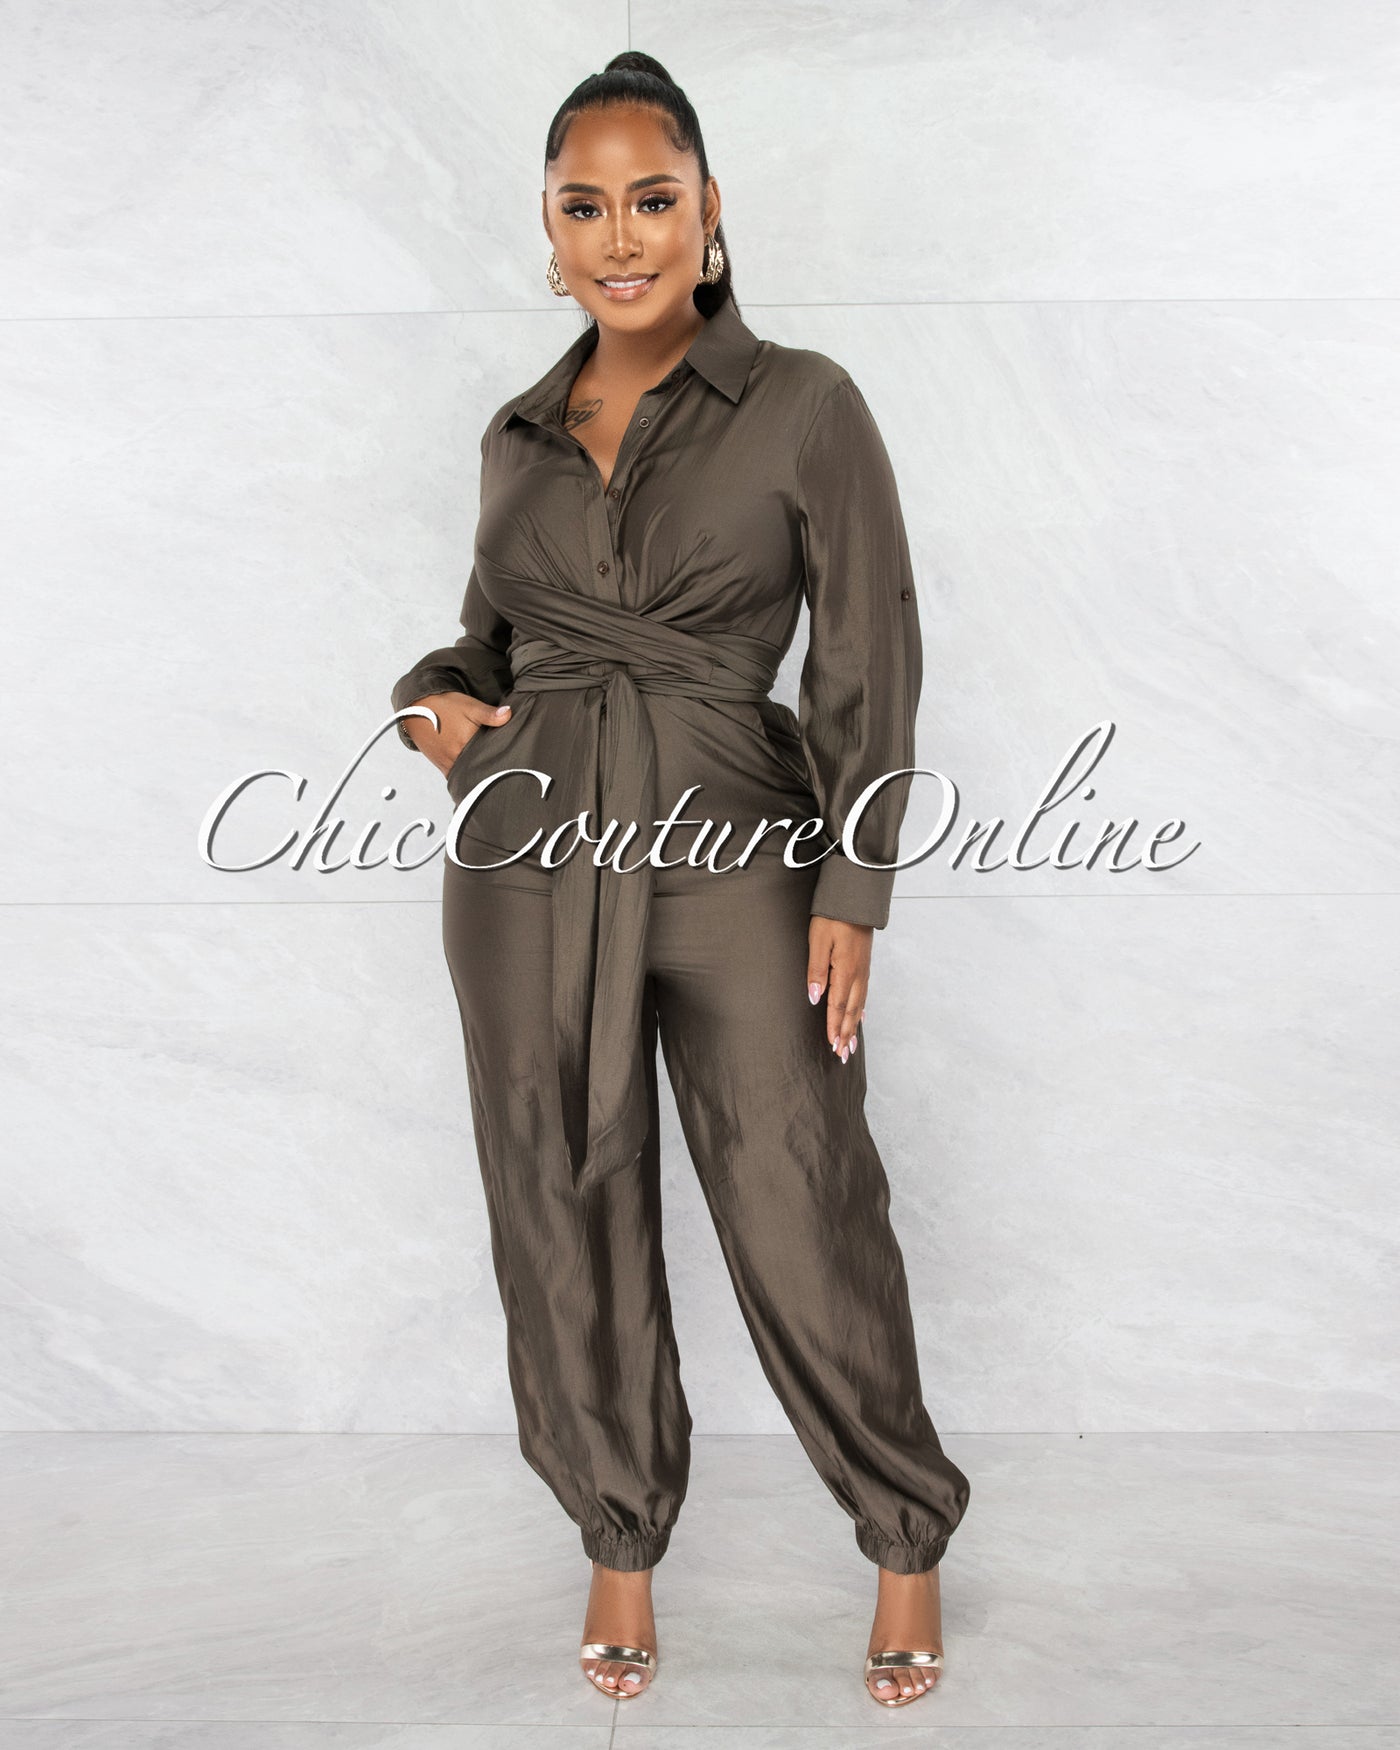 *Yamilla Olive Green Front Tie Utility Jumpsuit